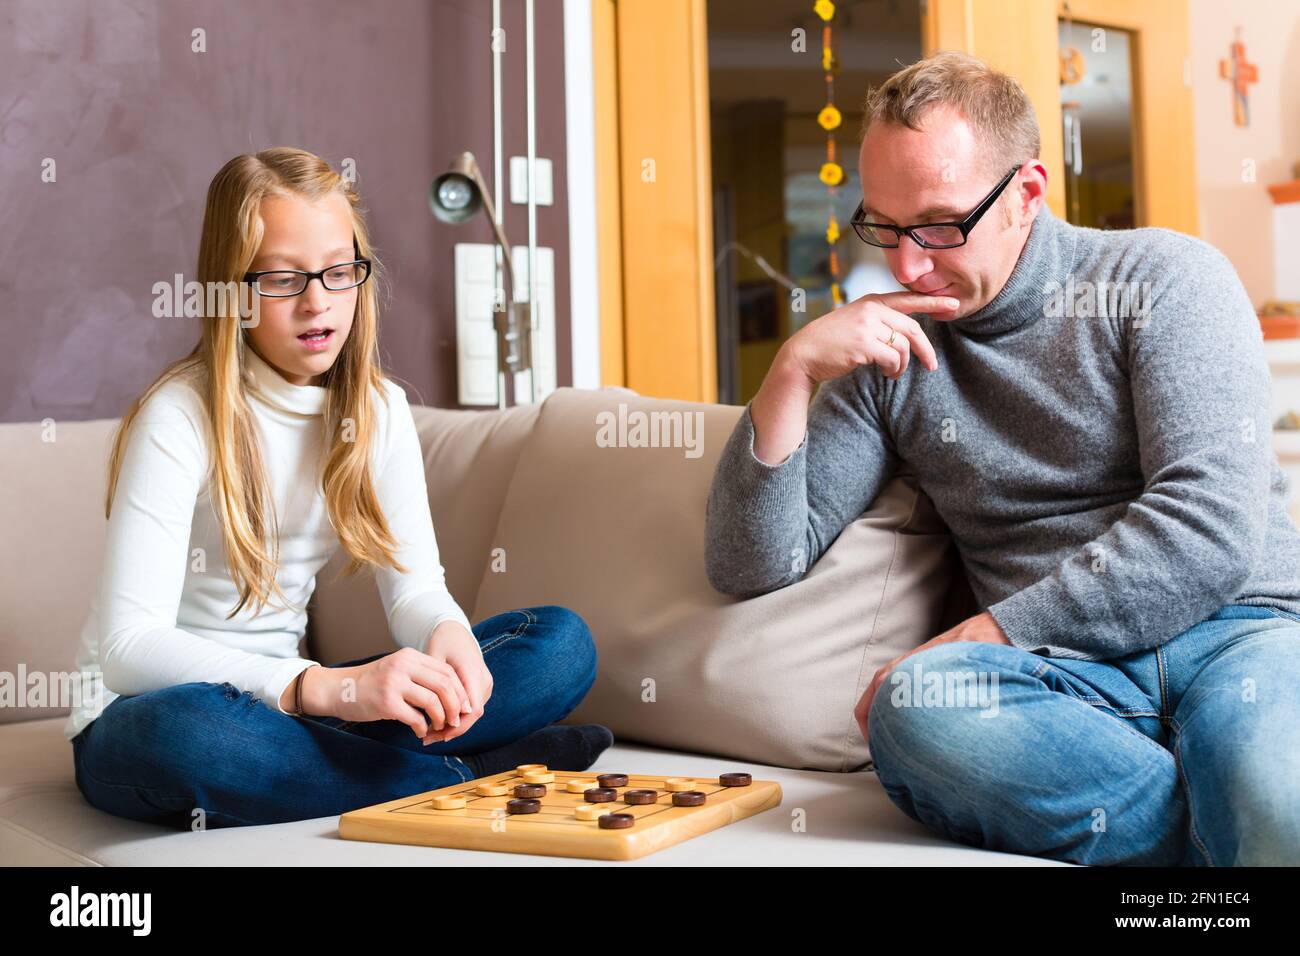 Father and daughter playing parlor or board game checkers on sofa Stock Photo